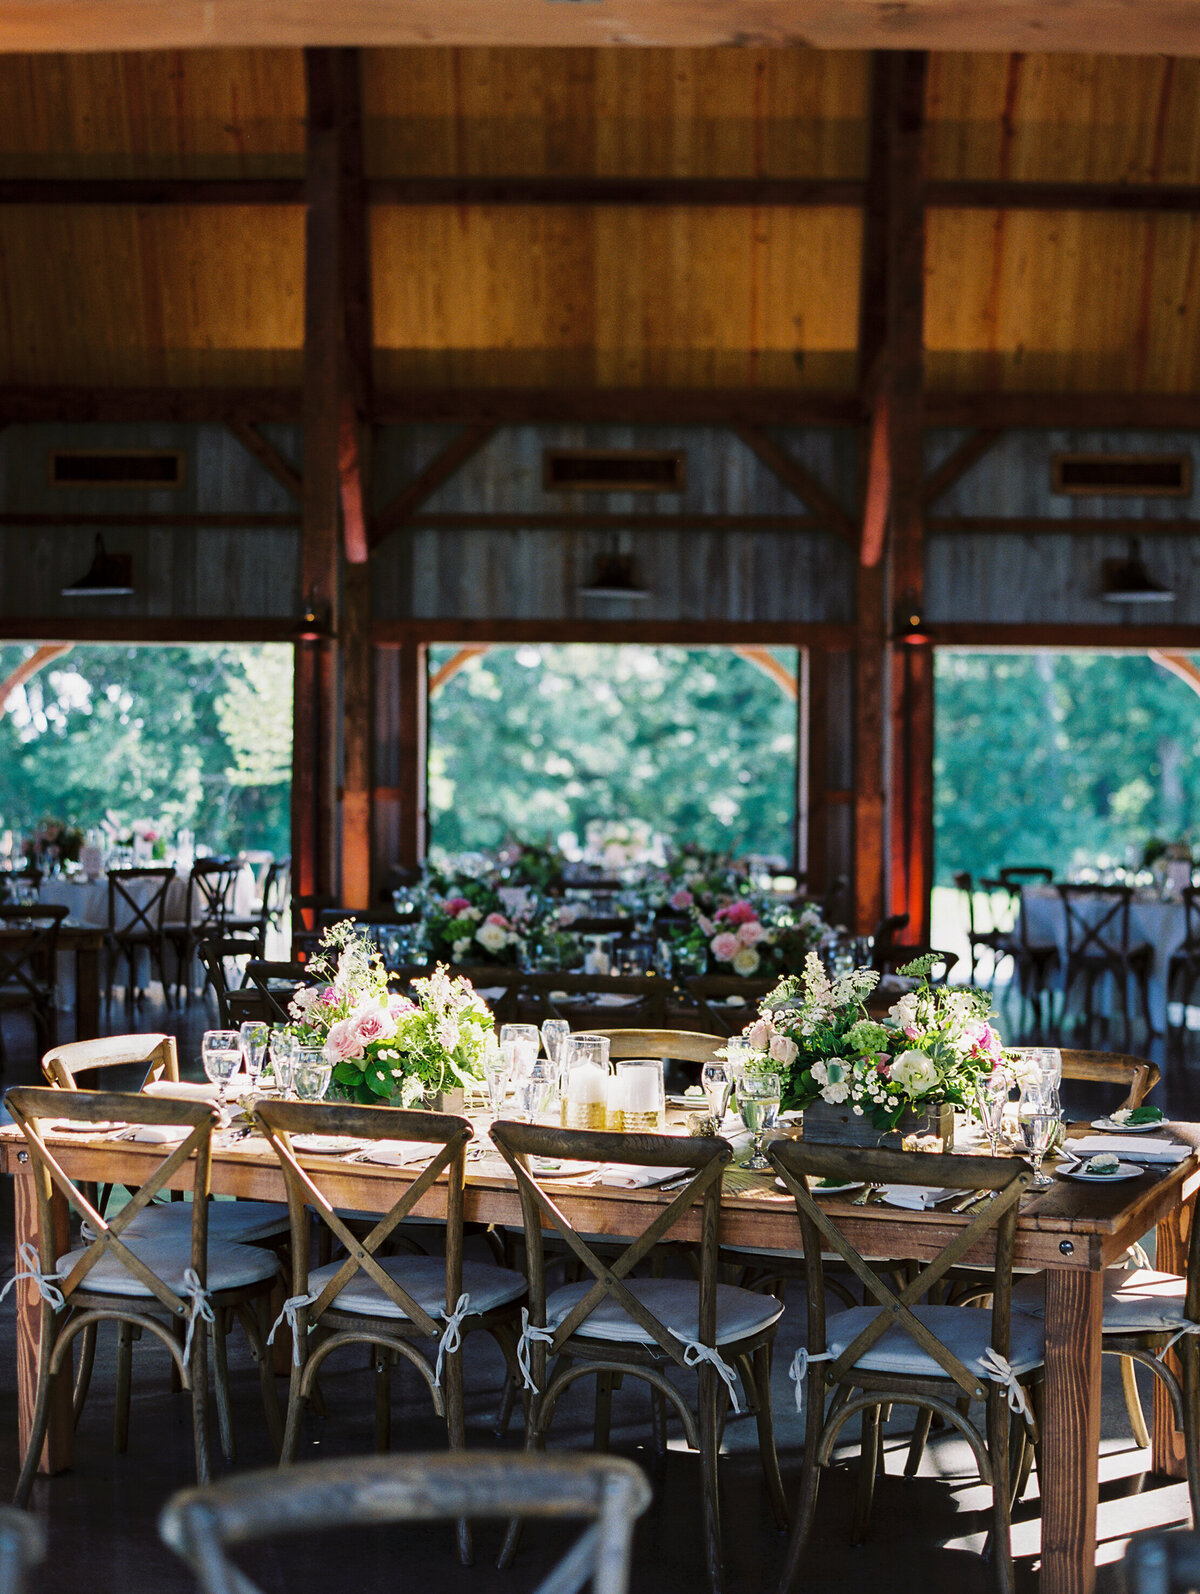 Wooden chairs and tables with floral centerpieces